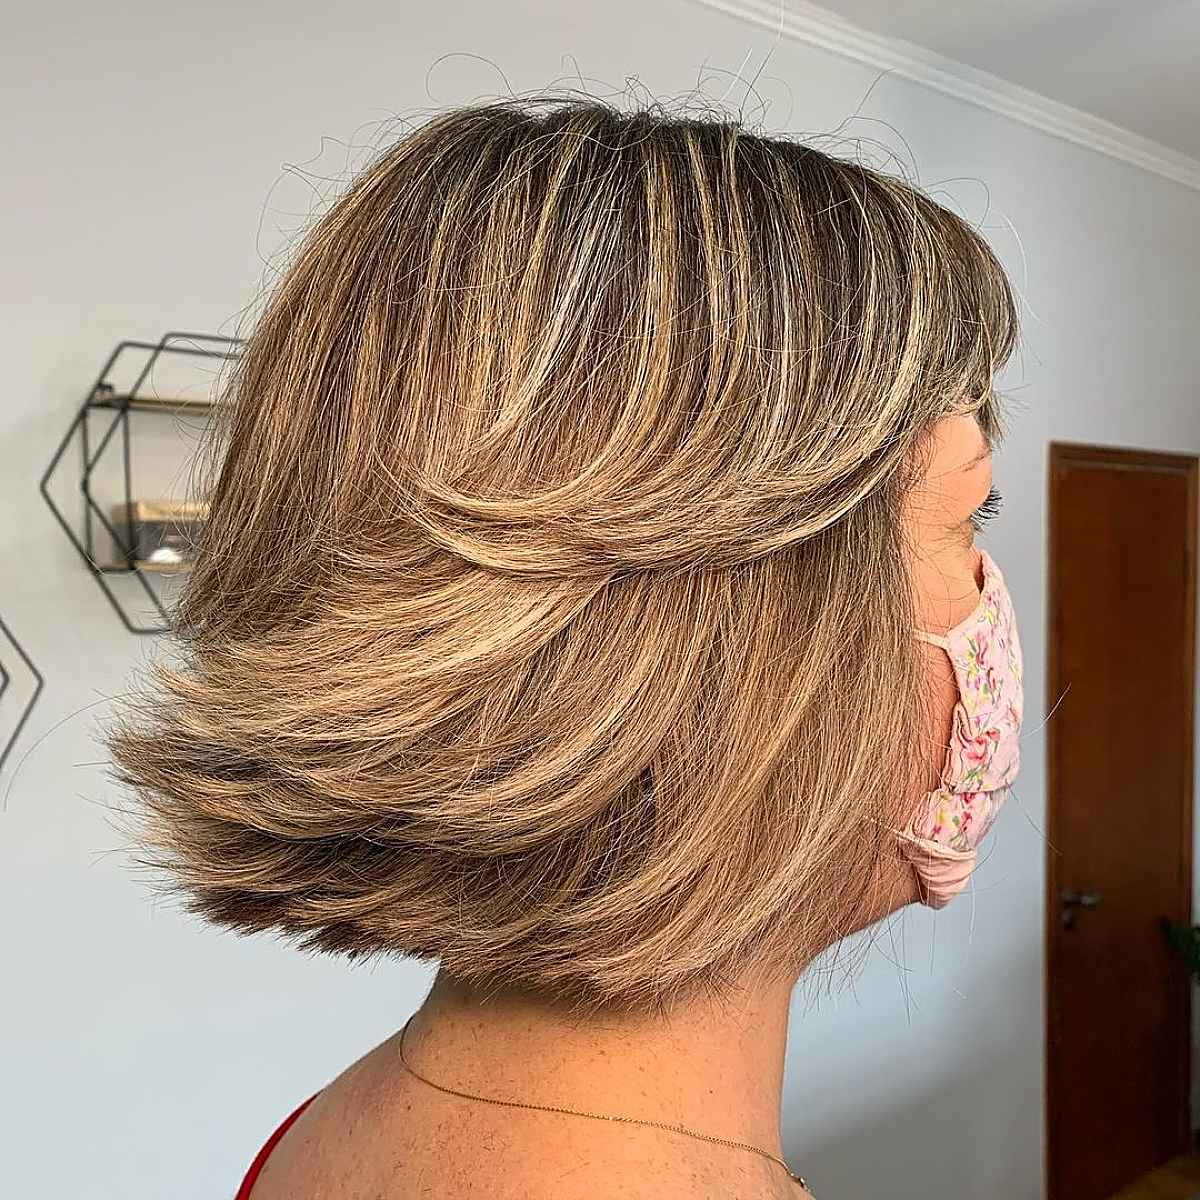 20 Very Short Bob Haircuts for a Chic and Bold Look